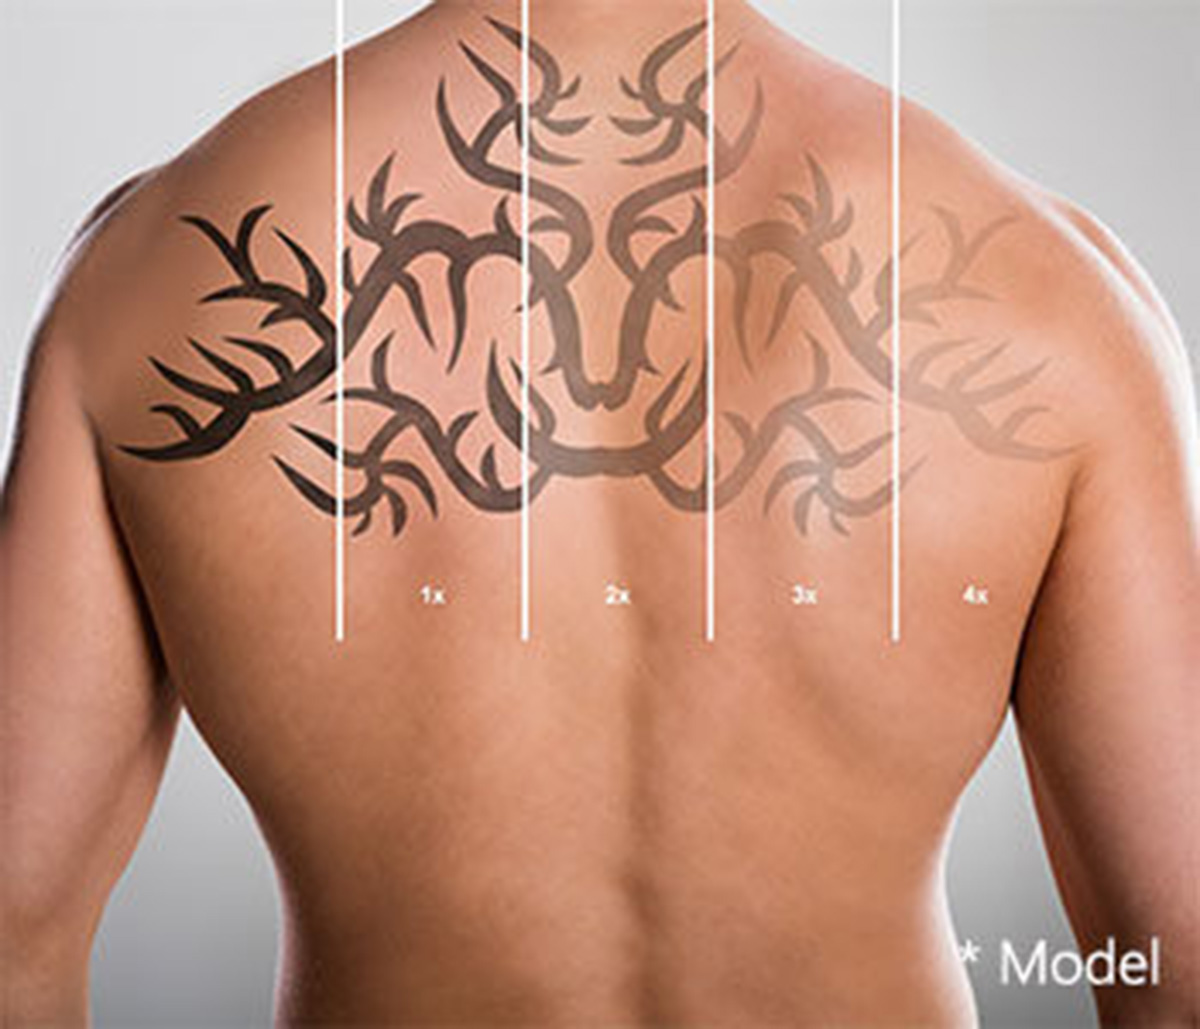 Plastic surgeon offers laser tattoo removal near Beverly Hills